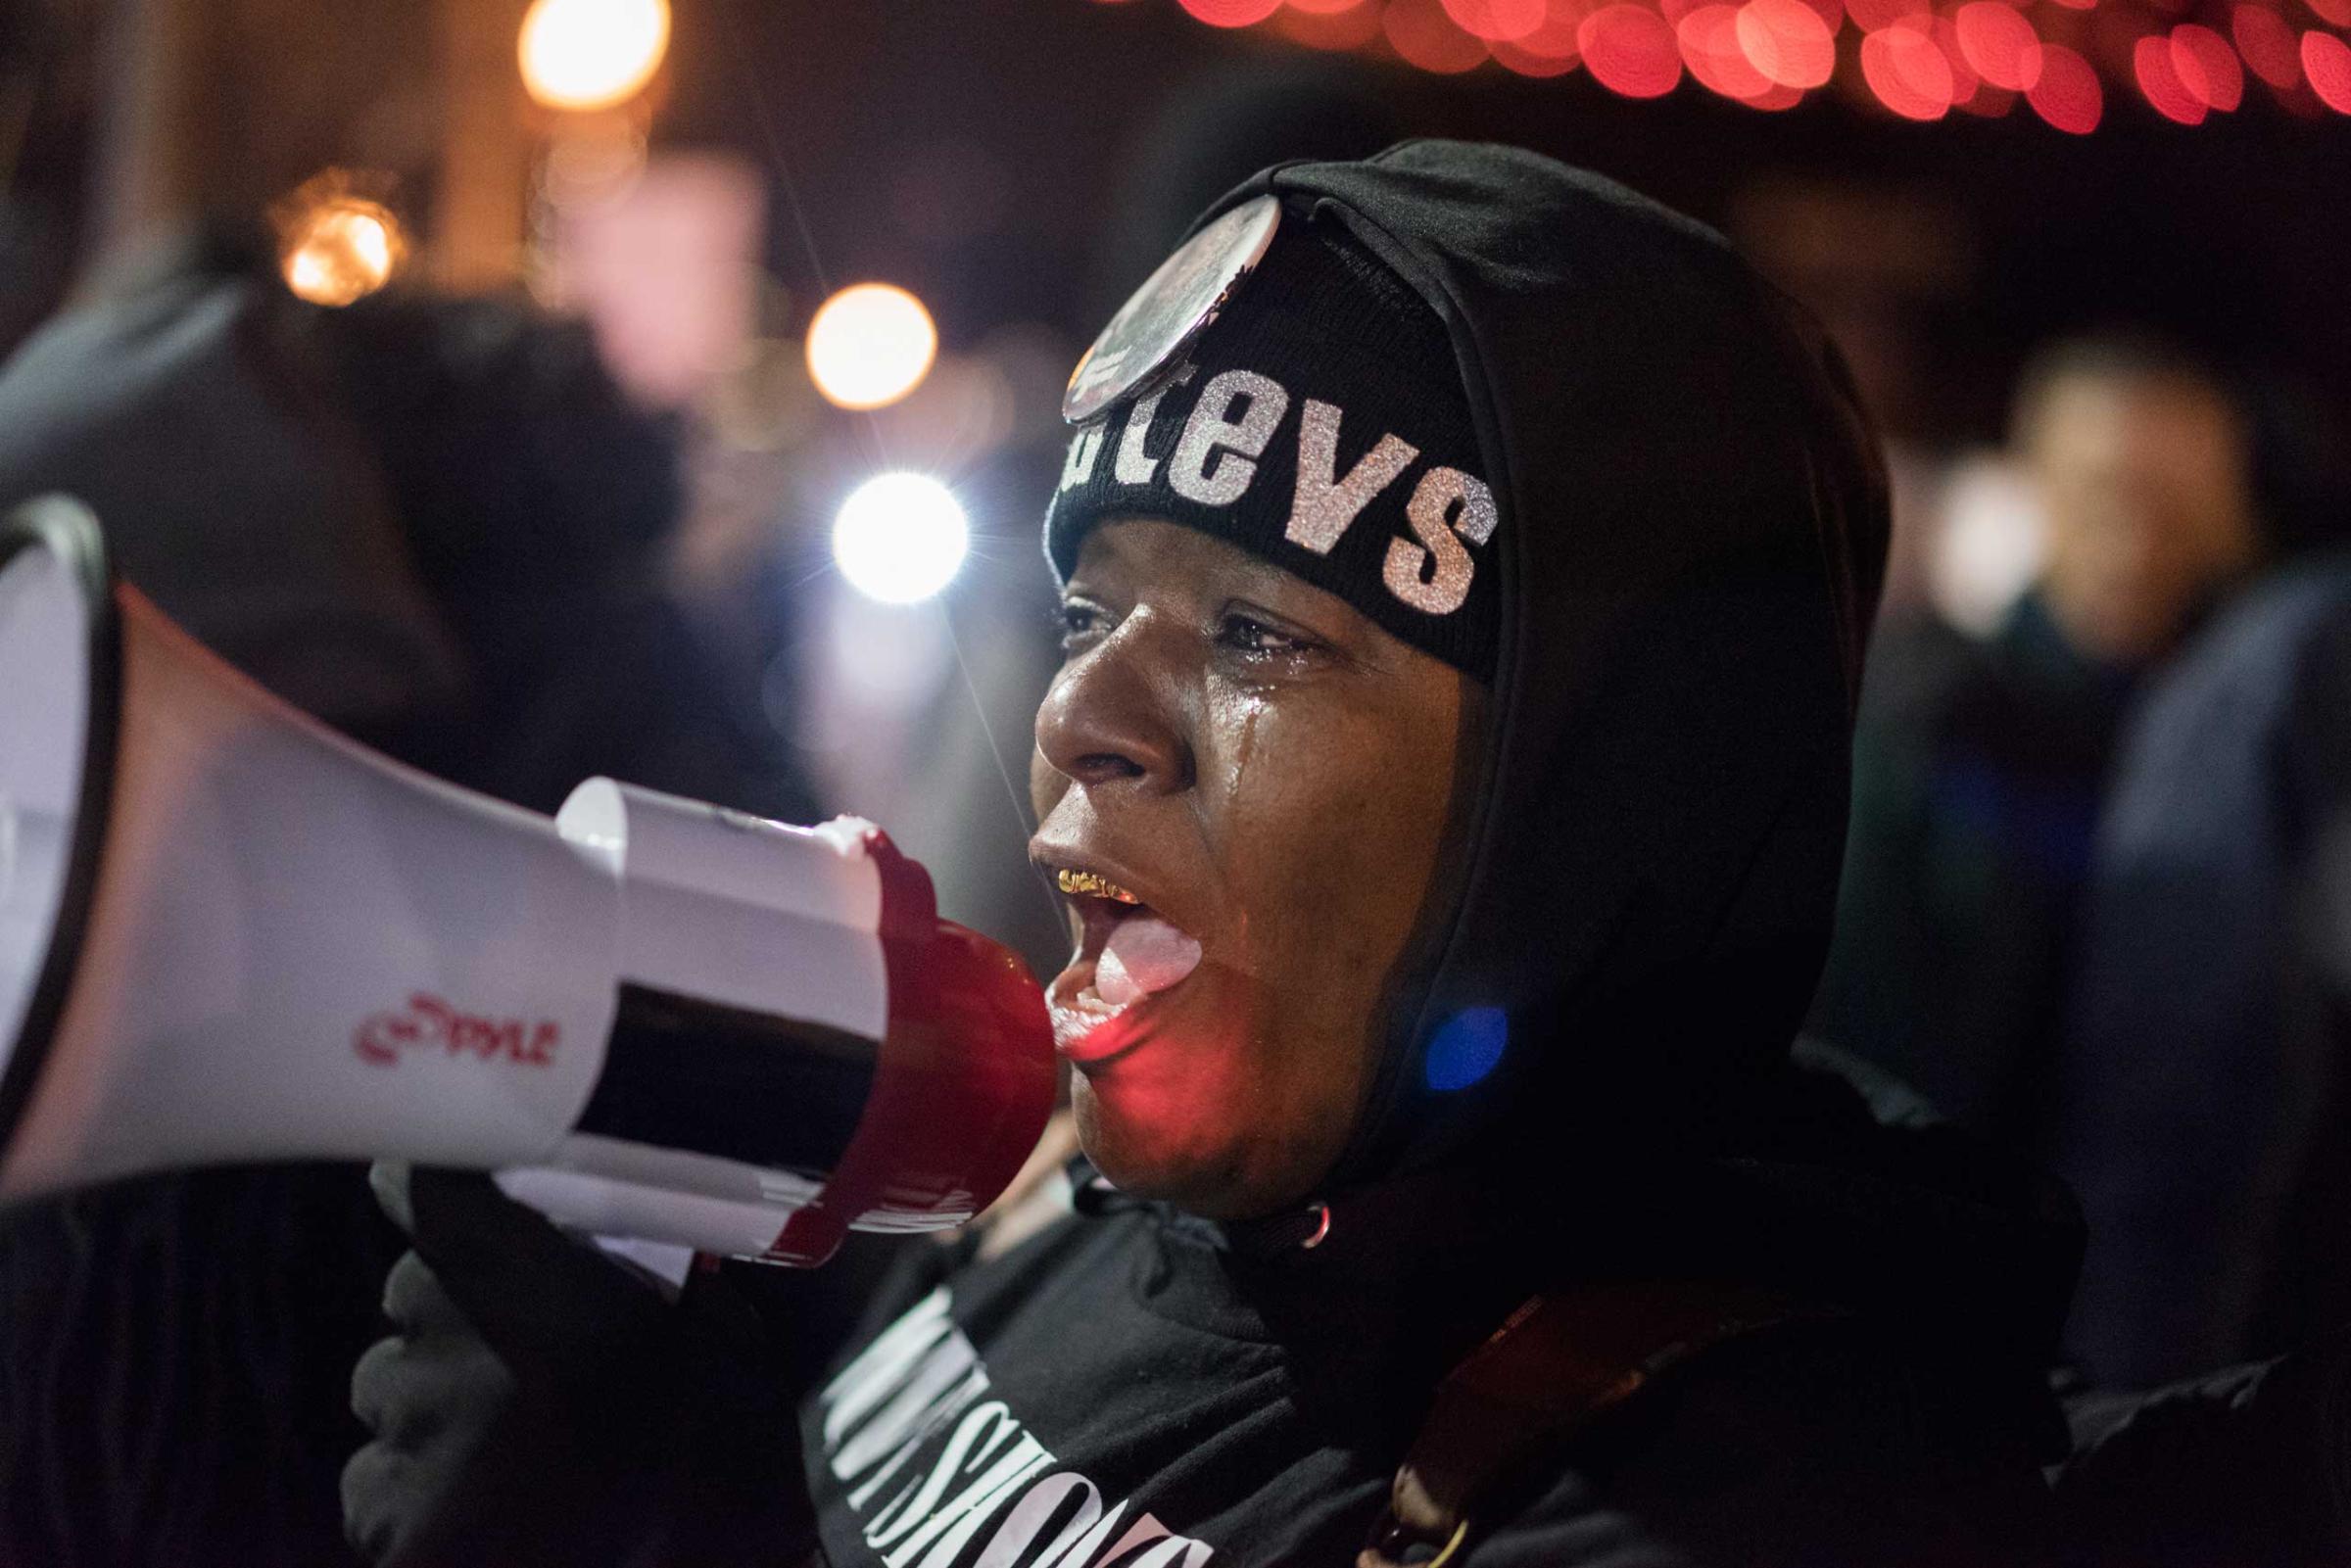 A woman speaks into a megaphone during protests in Ferguson, Mo. on Nov. 24, 2014